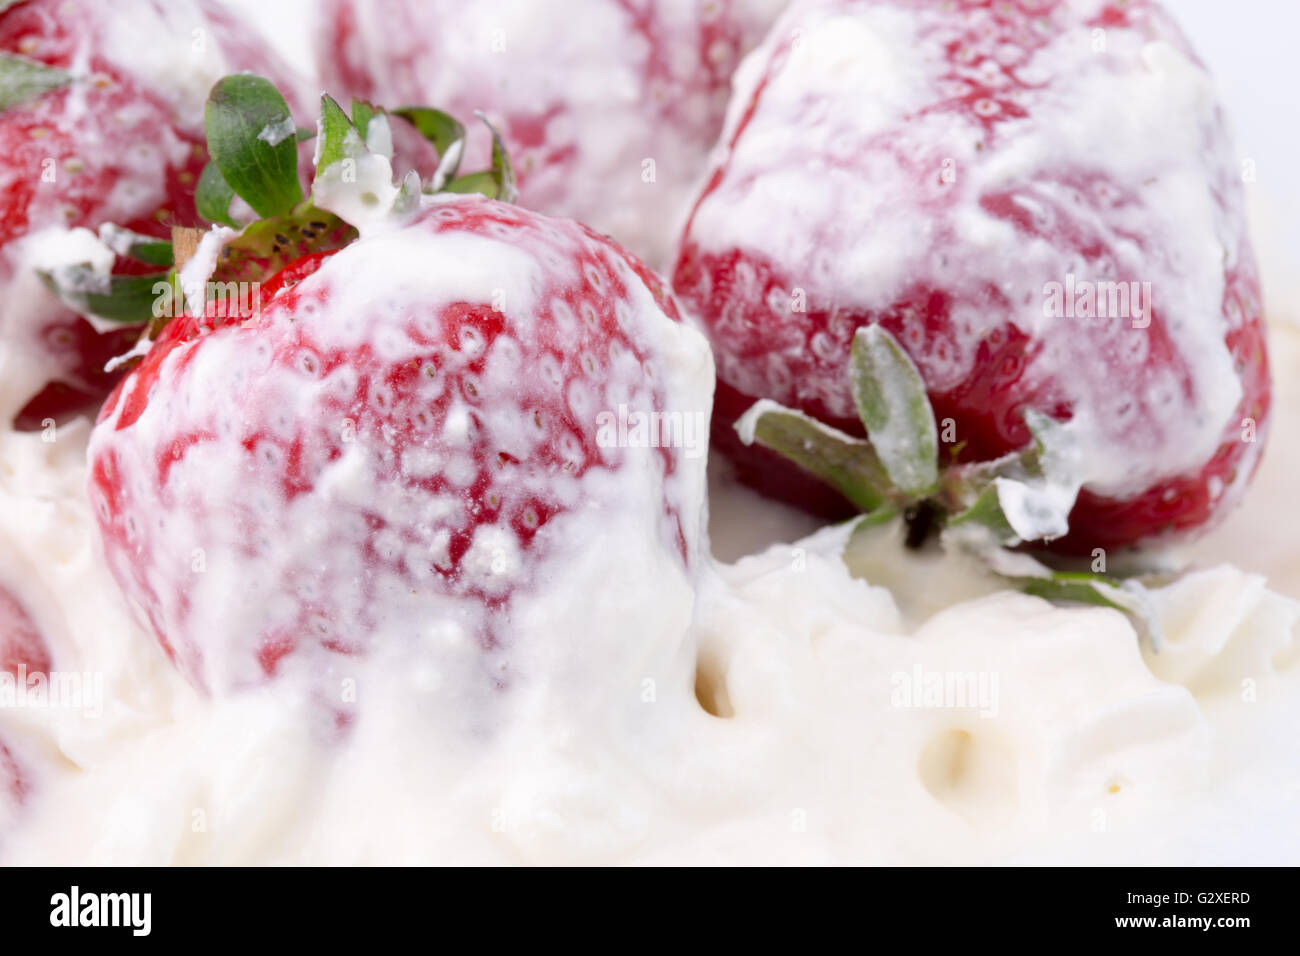 strawberries with whipped cream isolated on the white background. Stock Photo